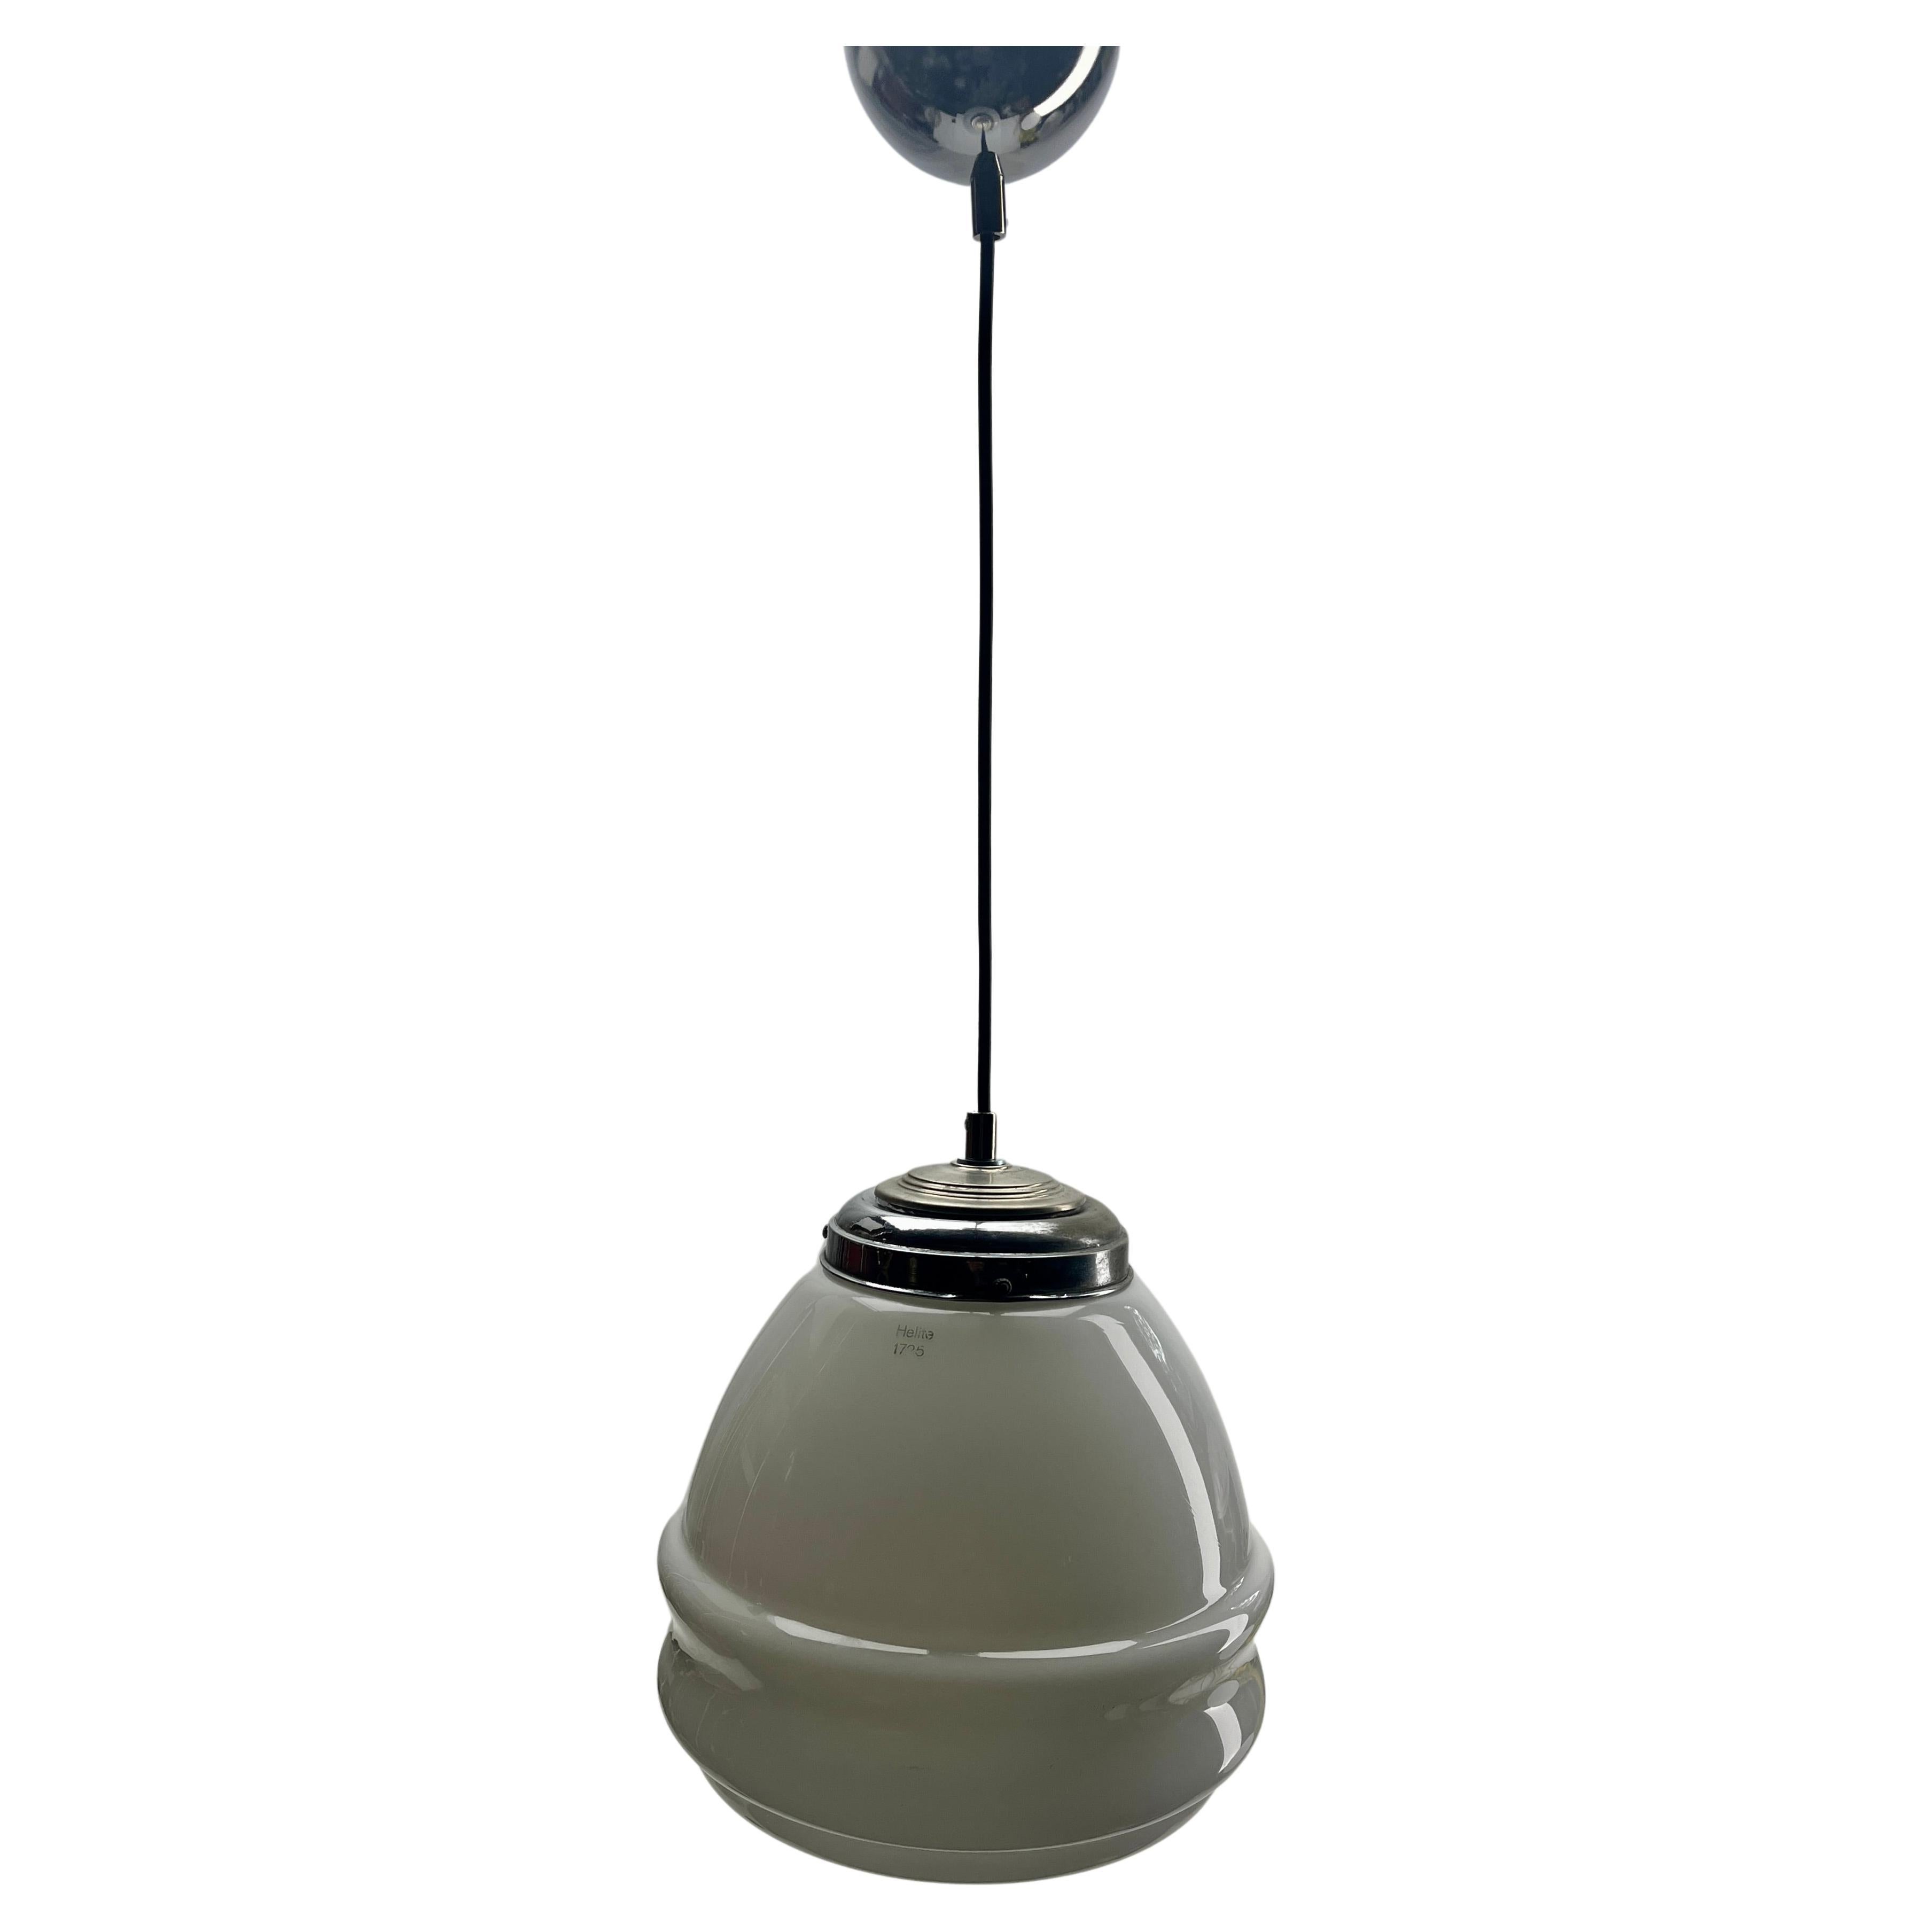 Mid-20th Century Helite Pendant Lamp with a Opaline Shade and Chrome Fittings, 1930s  For Sale